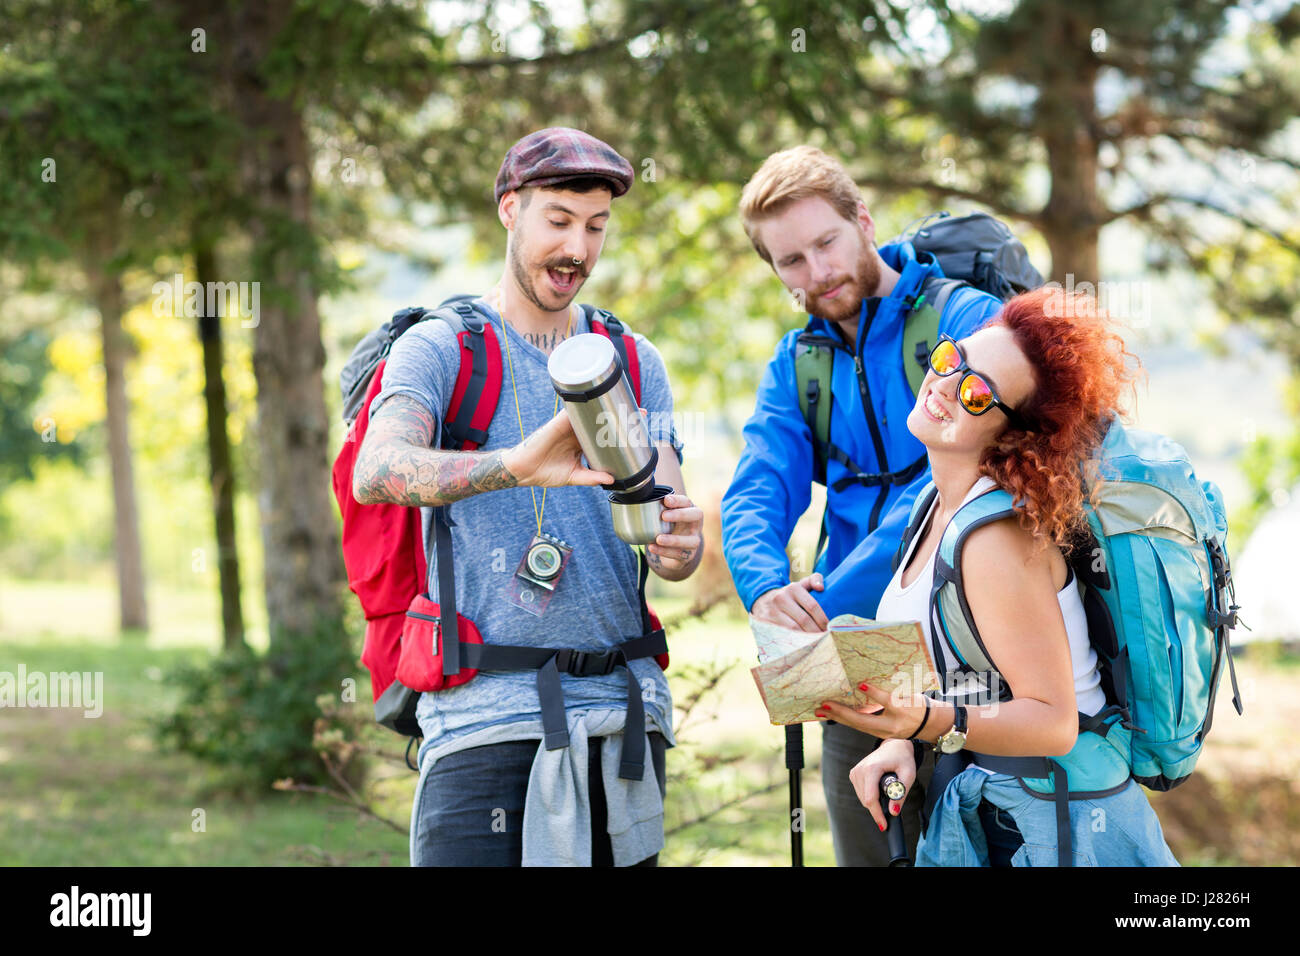 Group of mountaineering in forest with backpack, thermos, map and hiking sticks in green forest Stock Photo